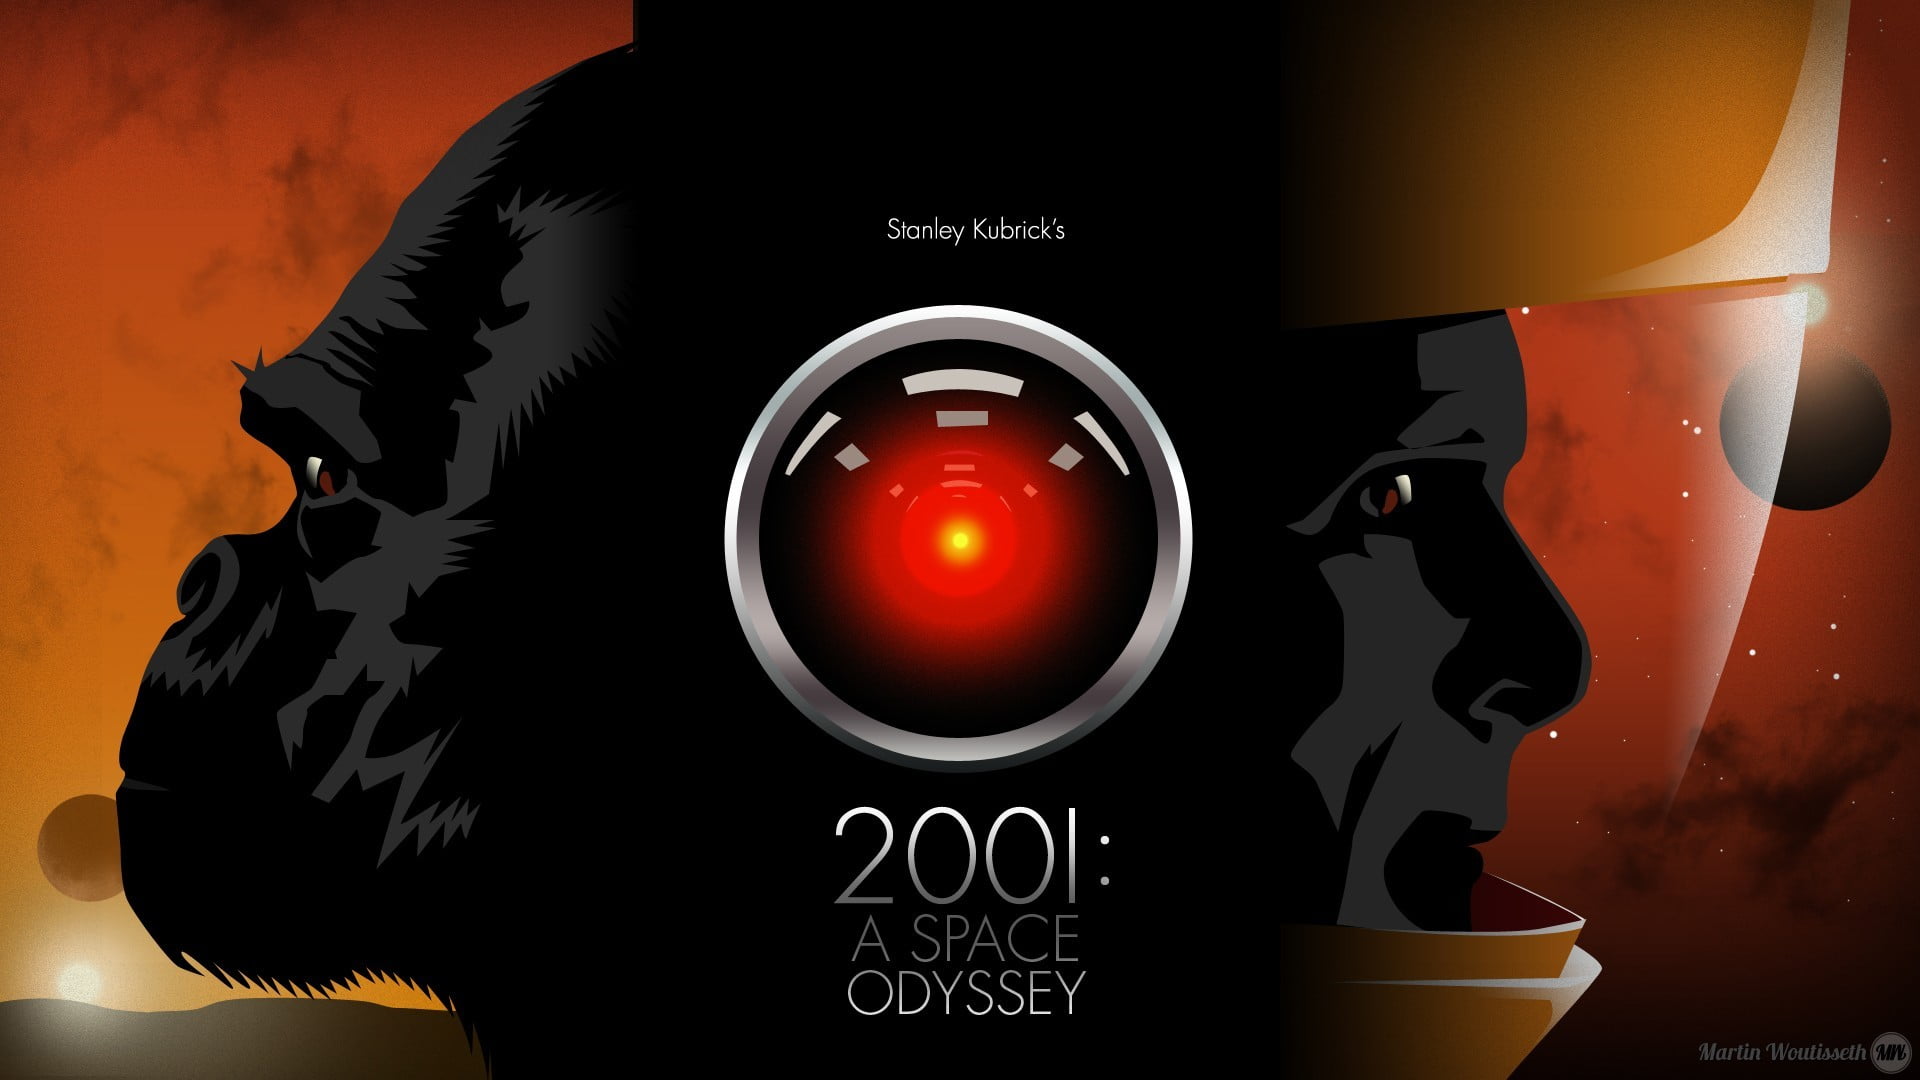 2001: A Space Odyssey digital wallpaper, 2001: A Space Odyssey, HAL 9000, movies